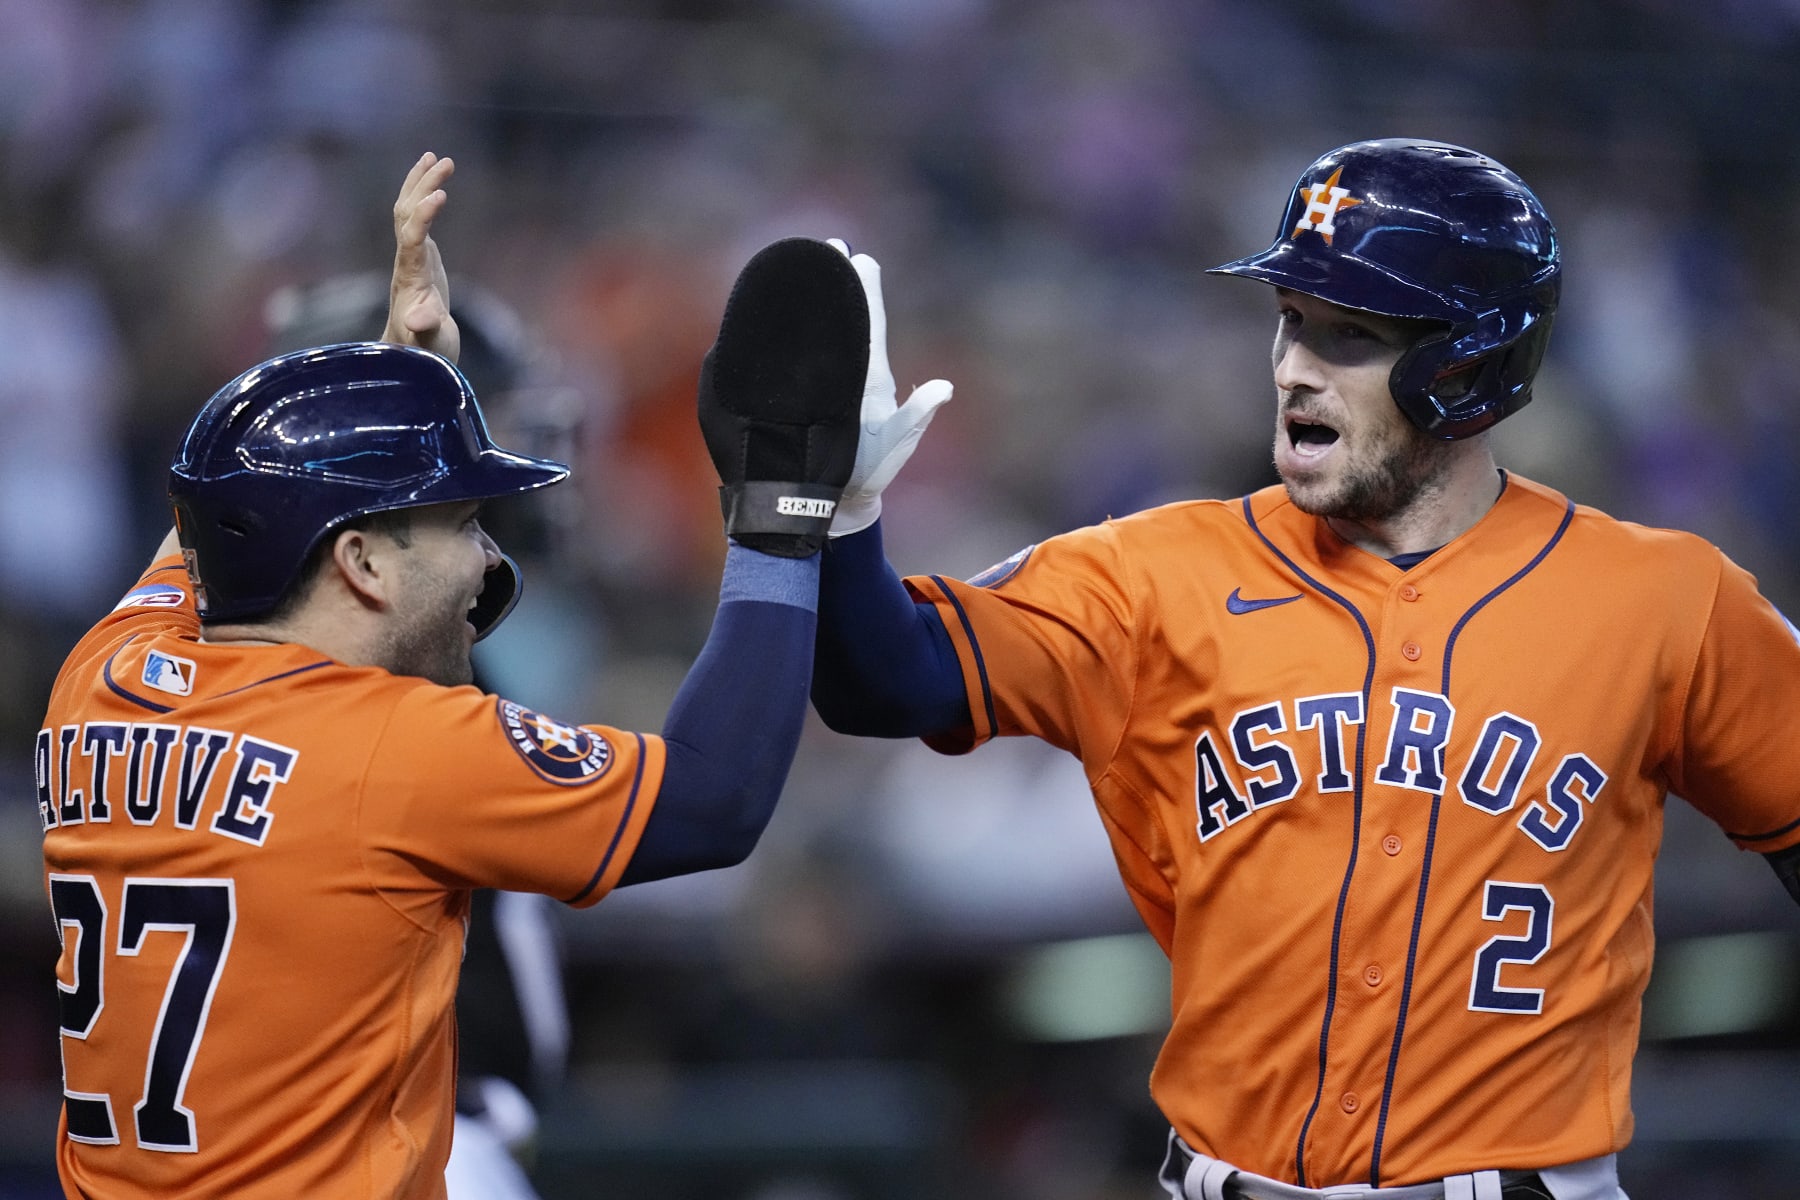 MLB playoffs: Astros don't intimidate these confident Red Sox